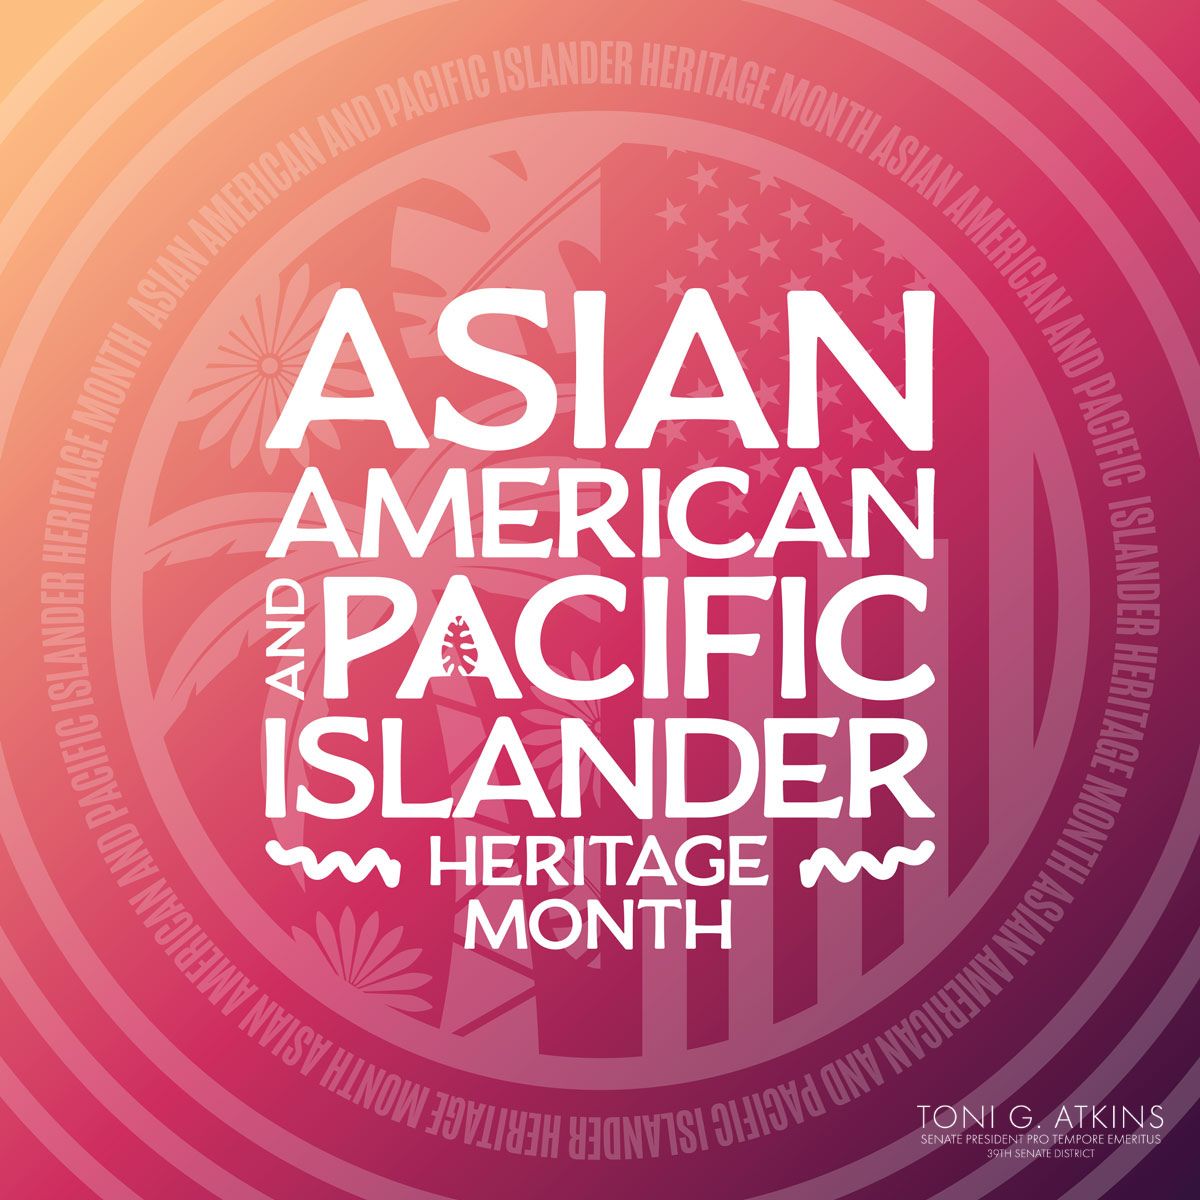 During #AAPIHeritageMonth, we celebrate the diverse AAPI communities across the United States. We also acknowledge the rise in anti-Asian hate crimes and recommit to our efforts to #StopAsianHate and promote tolerance, inclusion, and equity.